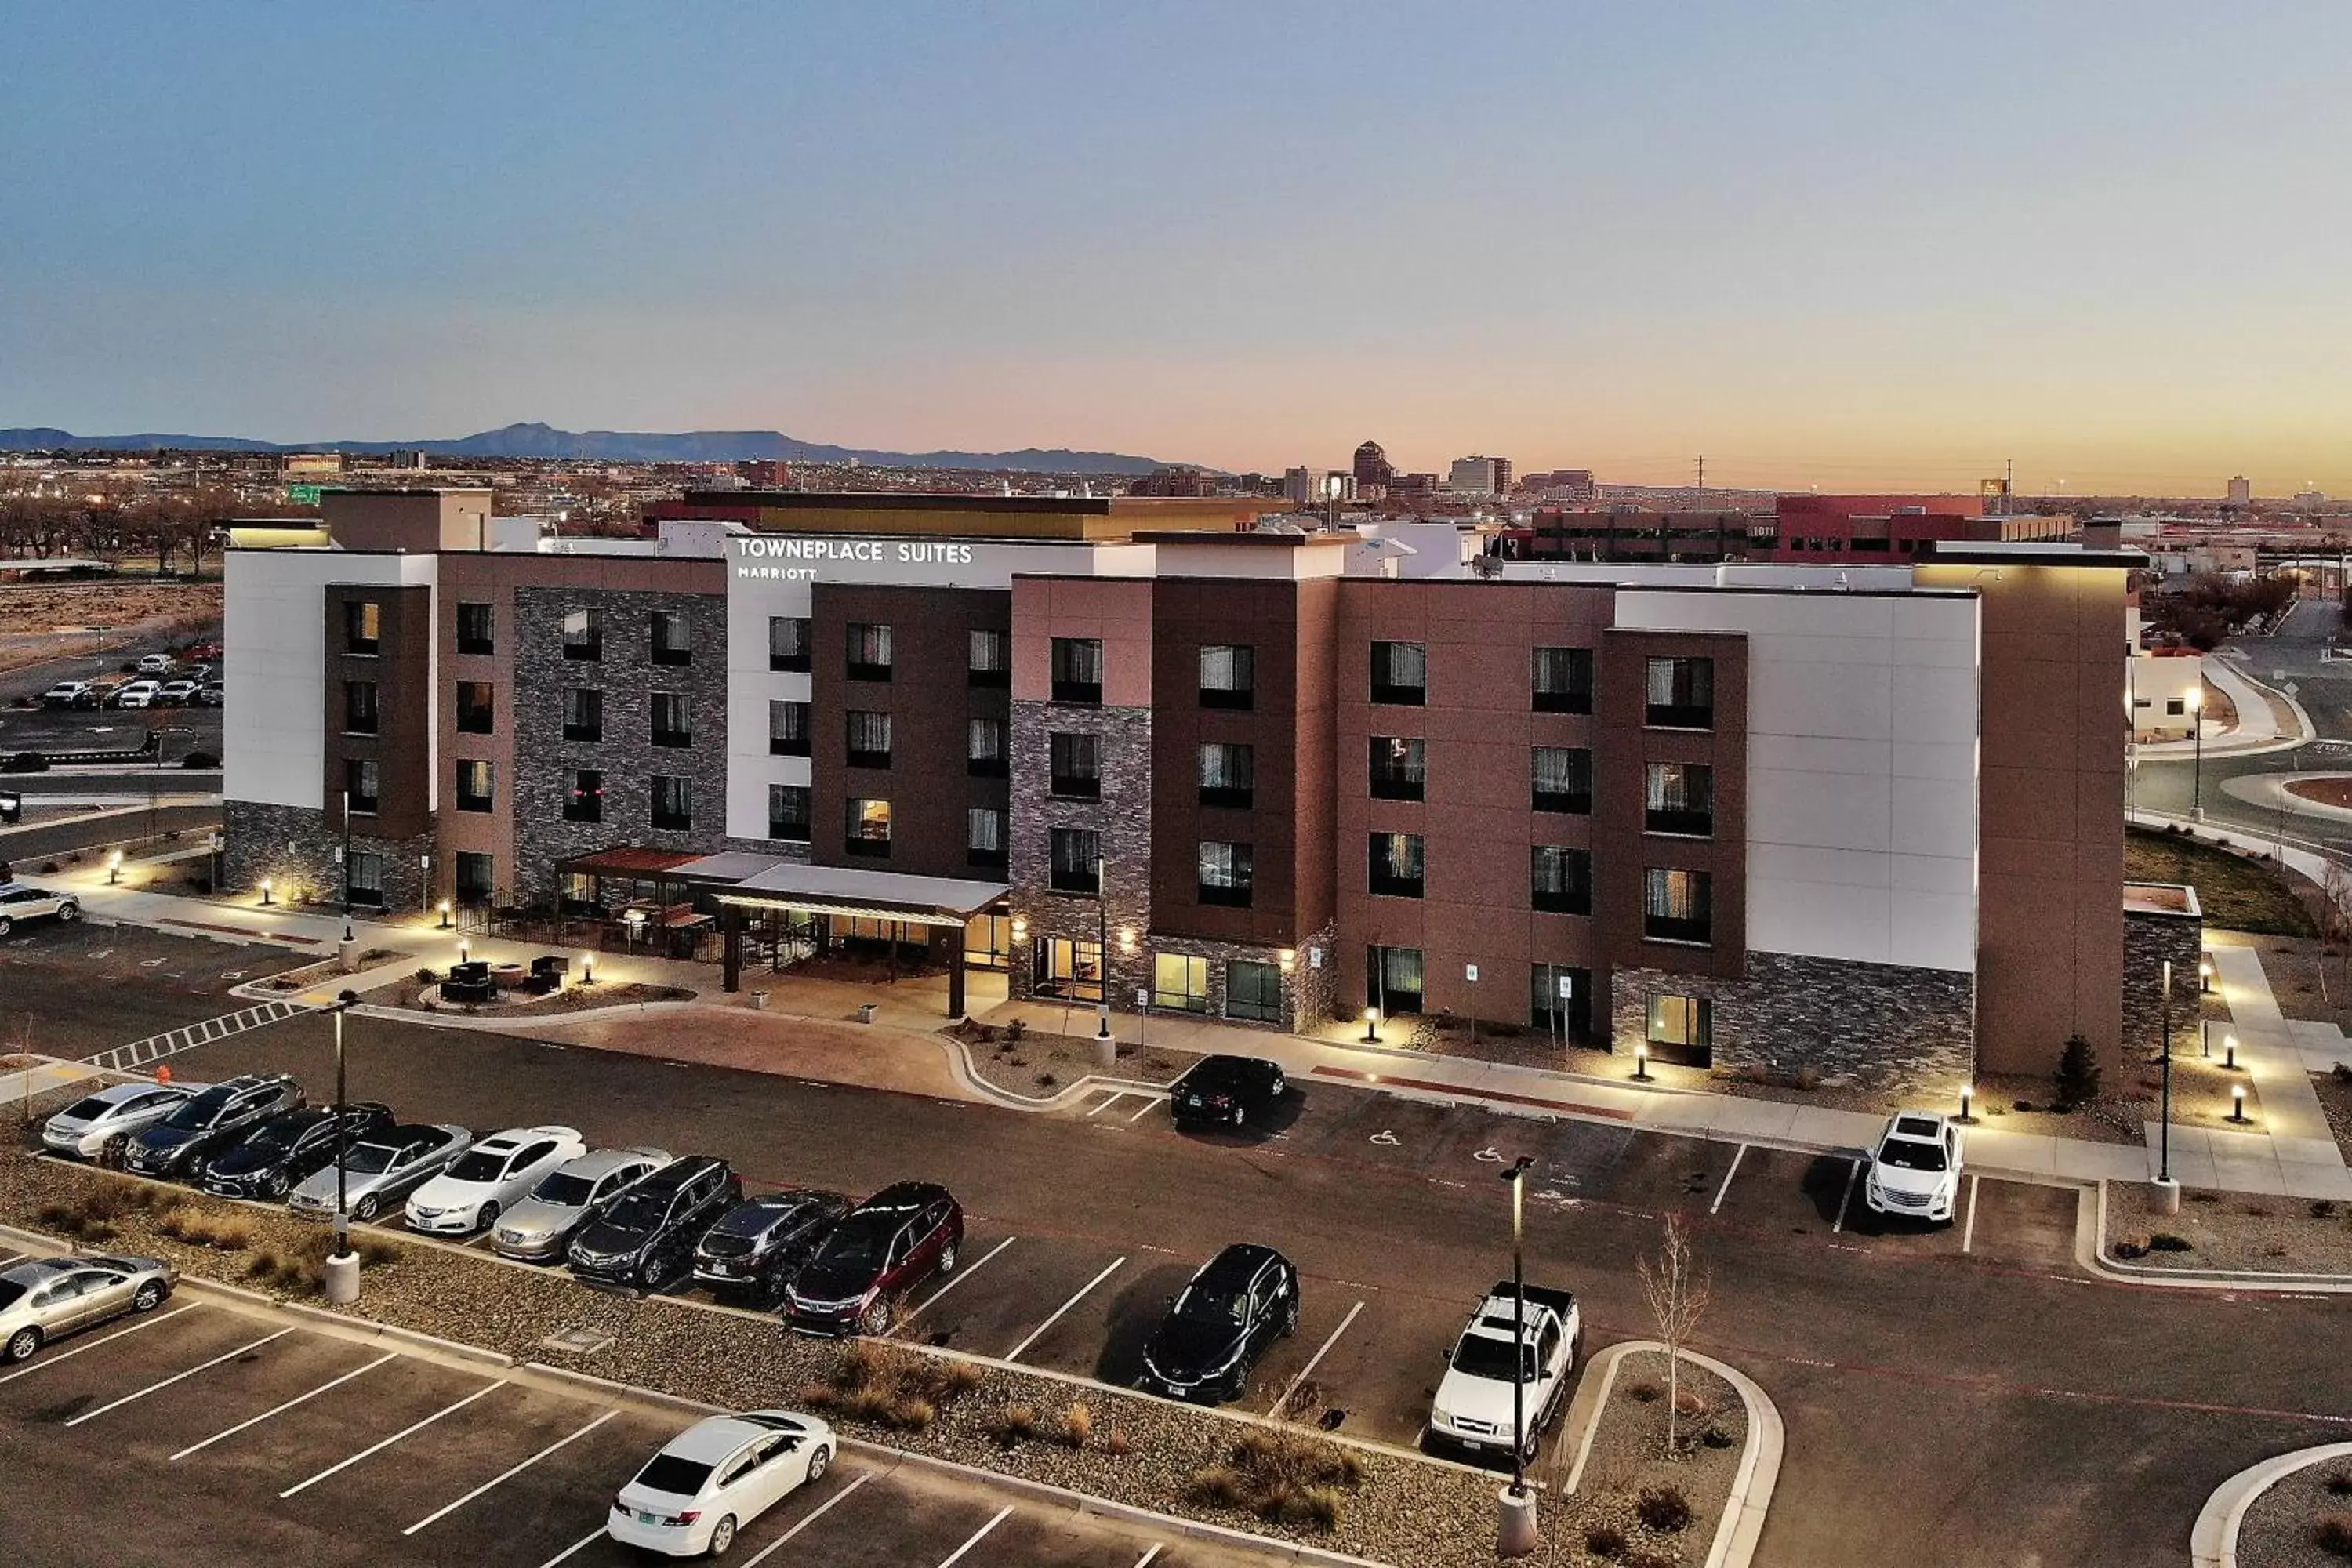 Property building in TownePlace Suites by Marriott Albuquerque Old Town